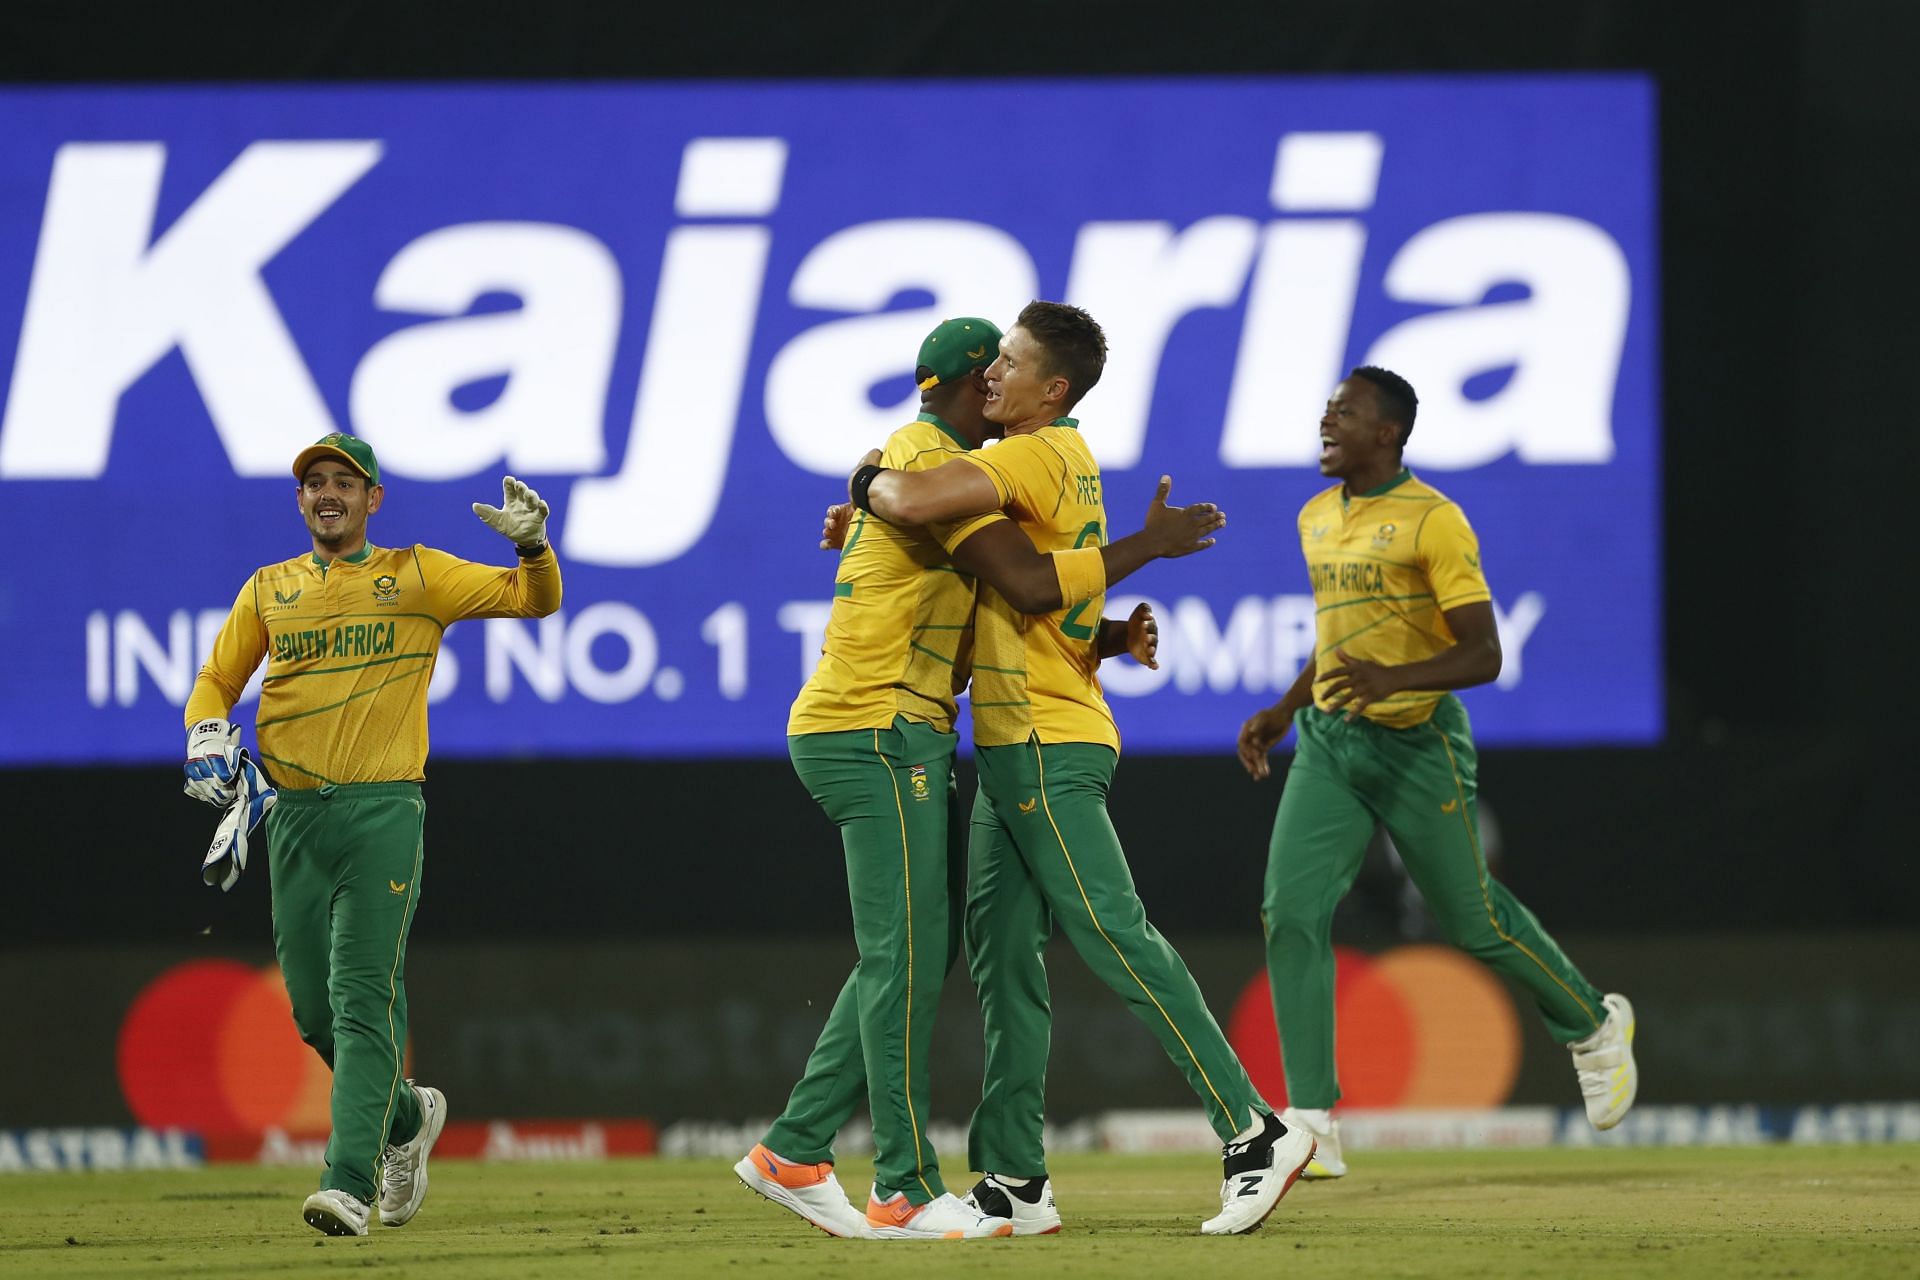 South Africa cricket team. (Credits: Getty)